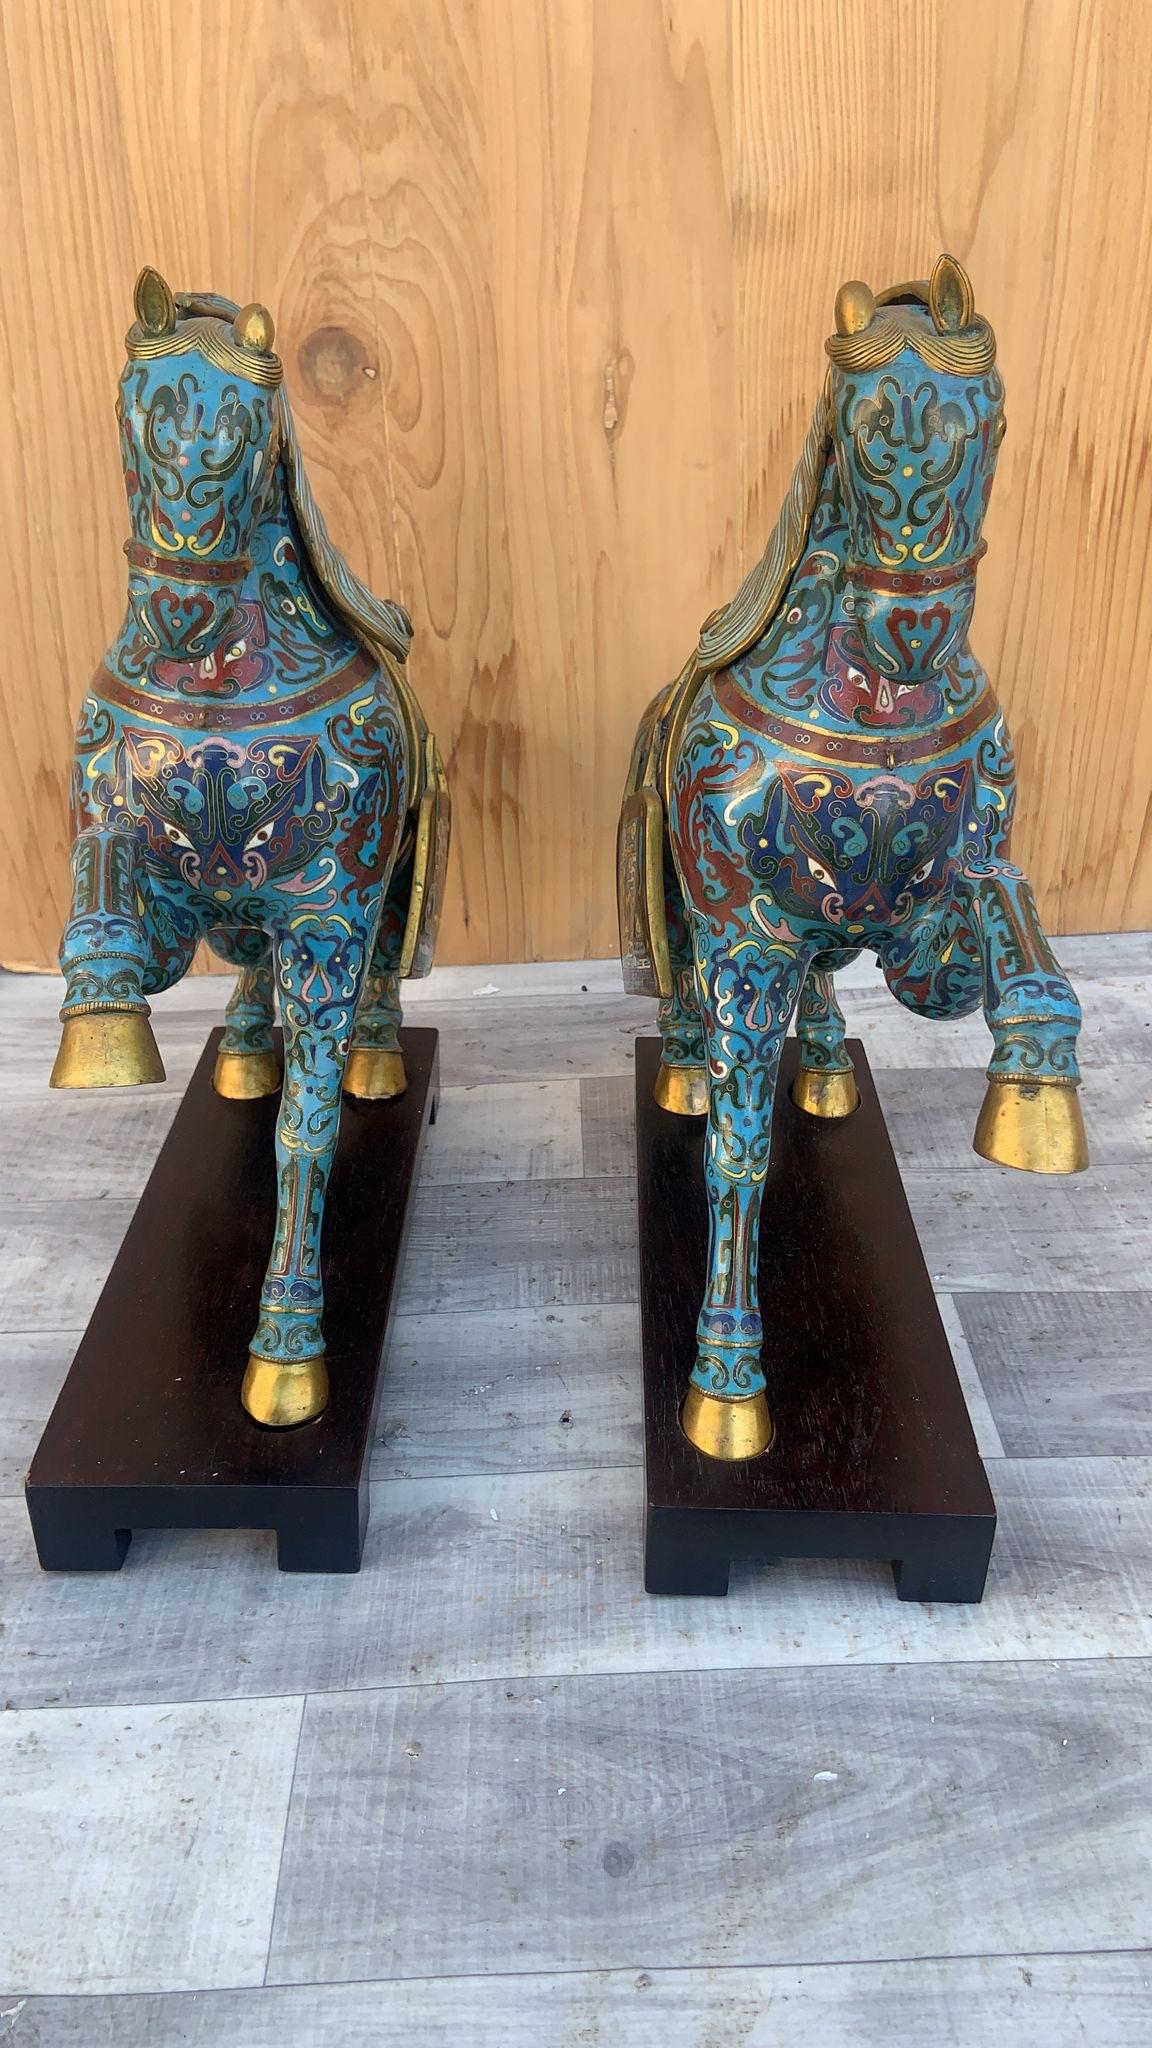 Hand-Crafted Vintage Chinese Cloisonné War Horse Sculptures on Mahogany Base - Pair For Sale